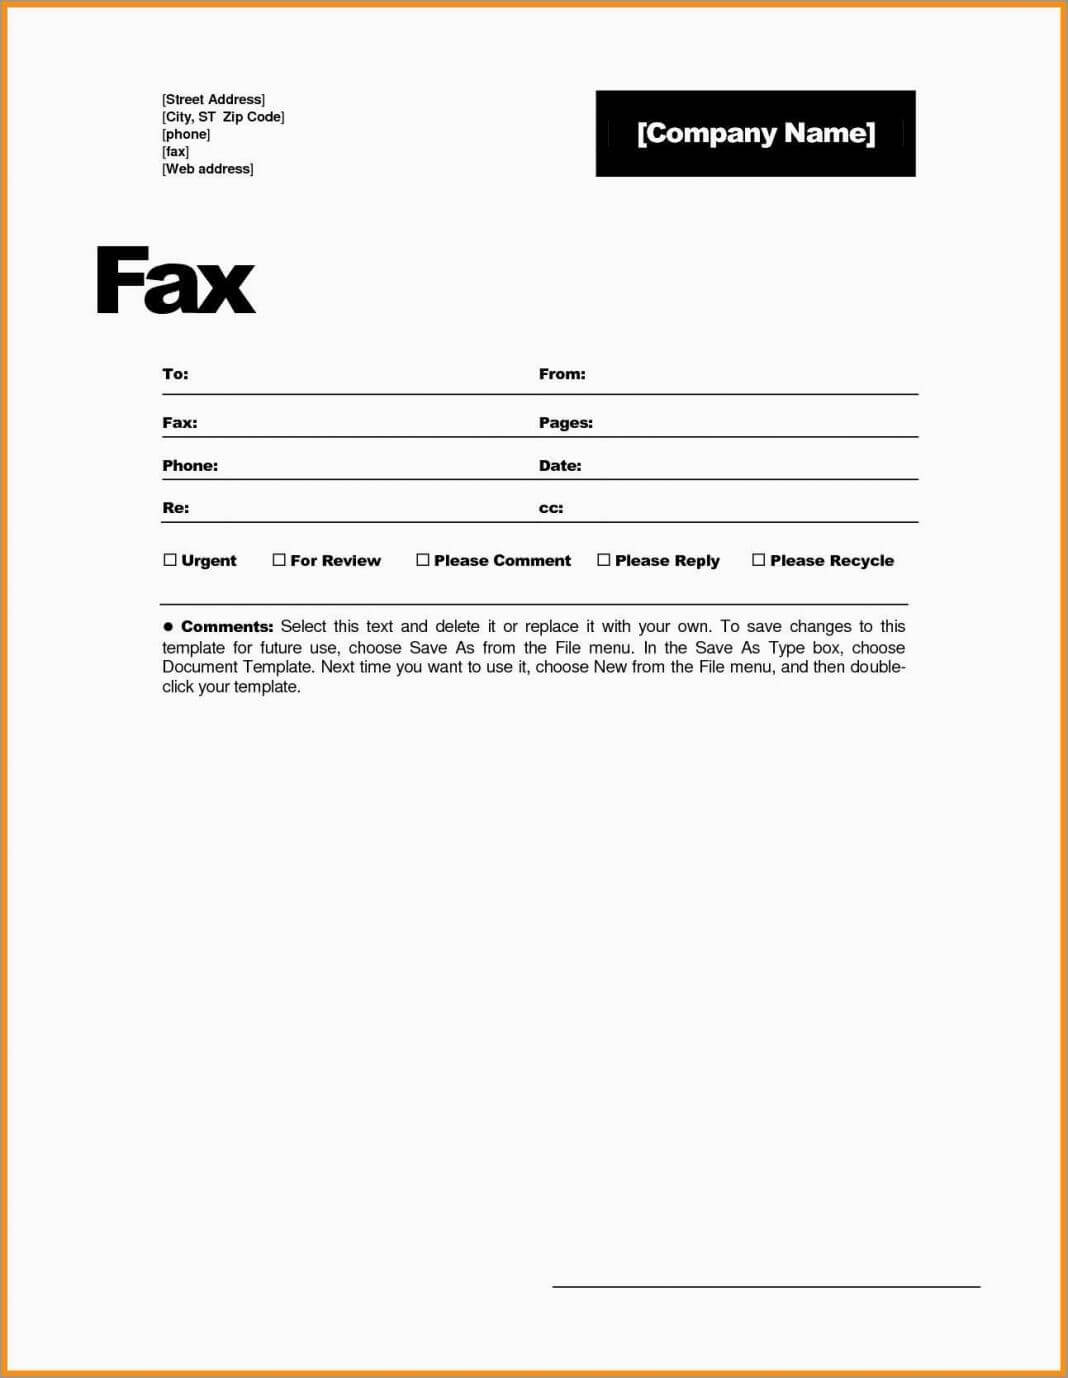 Fax Cover Sheet Plate Word Spreadsheet Examples Page Free Within Fax Cover Sheet Template Word 2010